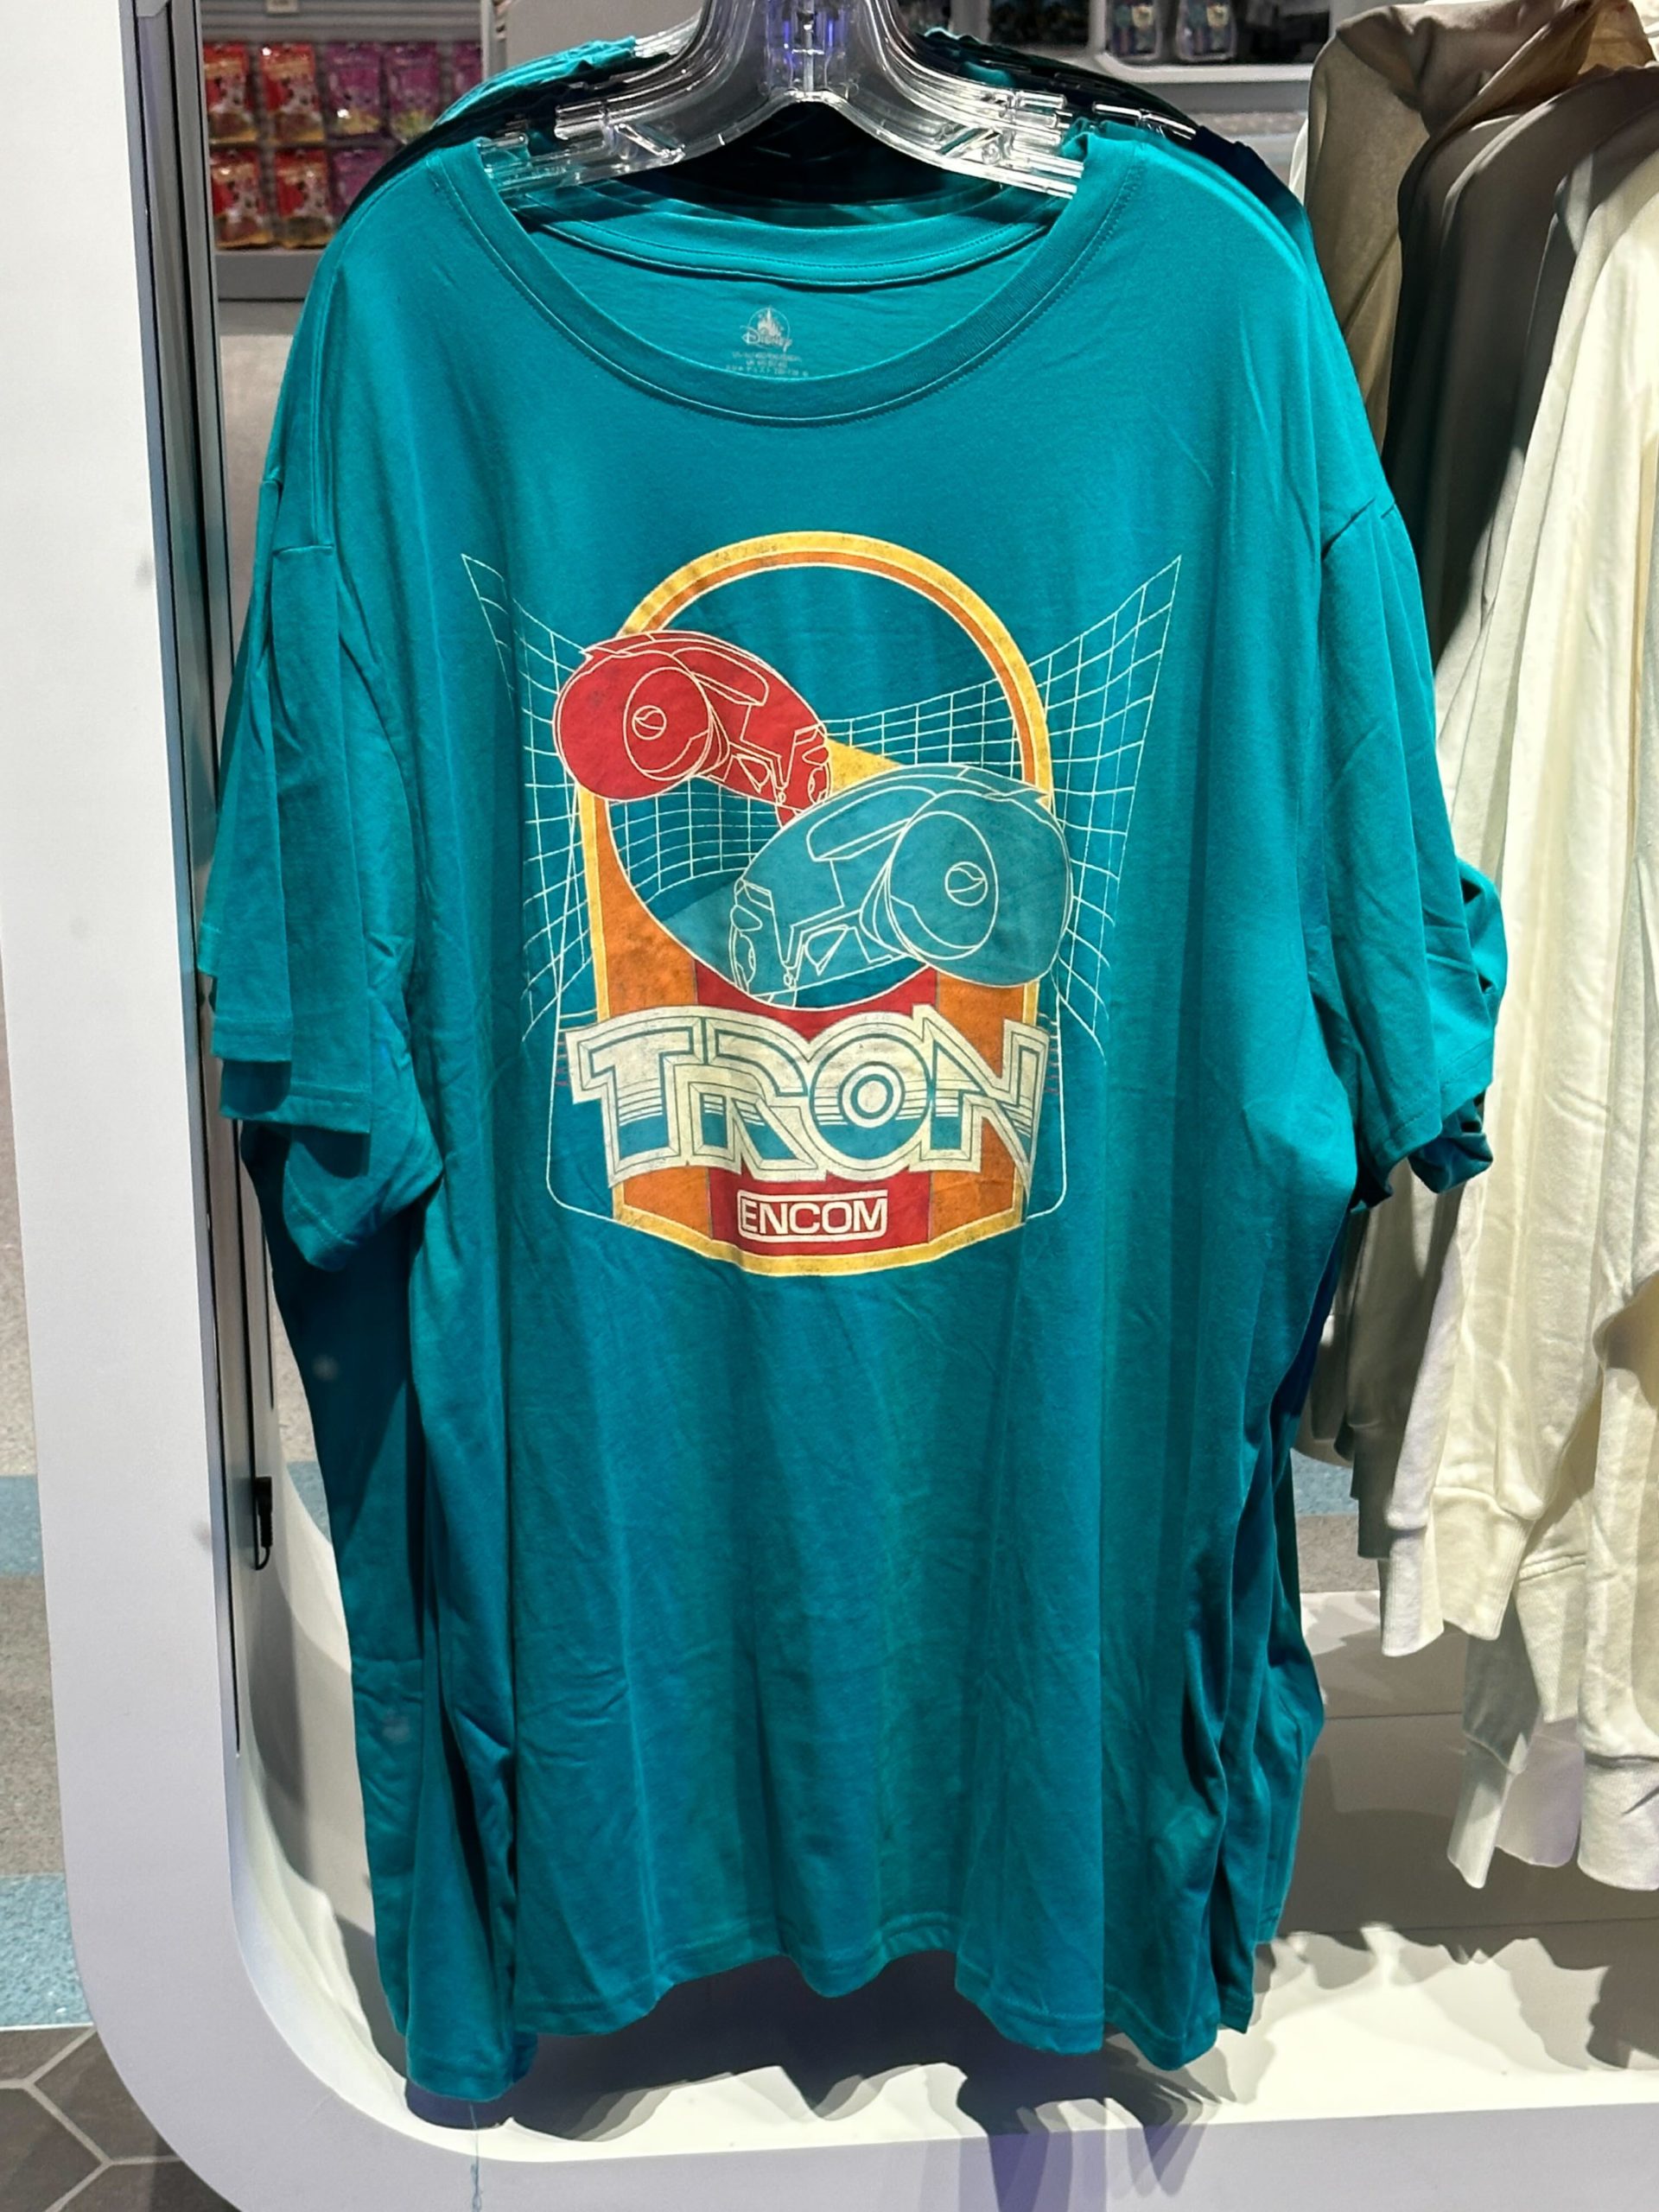 FIRST LOOK: TRON Merch on Display at Launch Depot - MickeyBlog.com